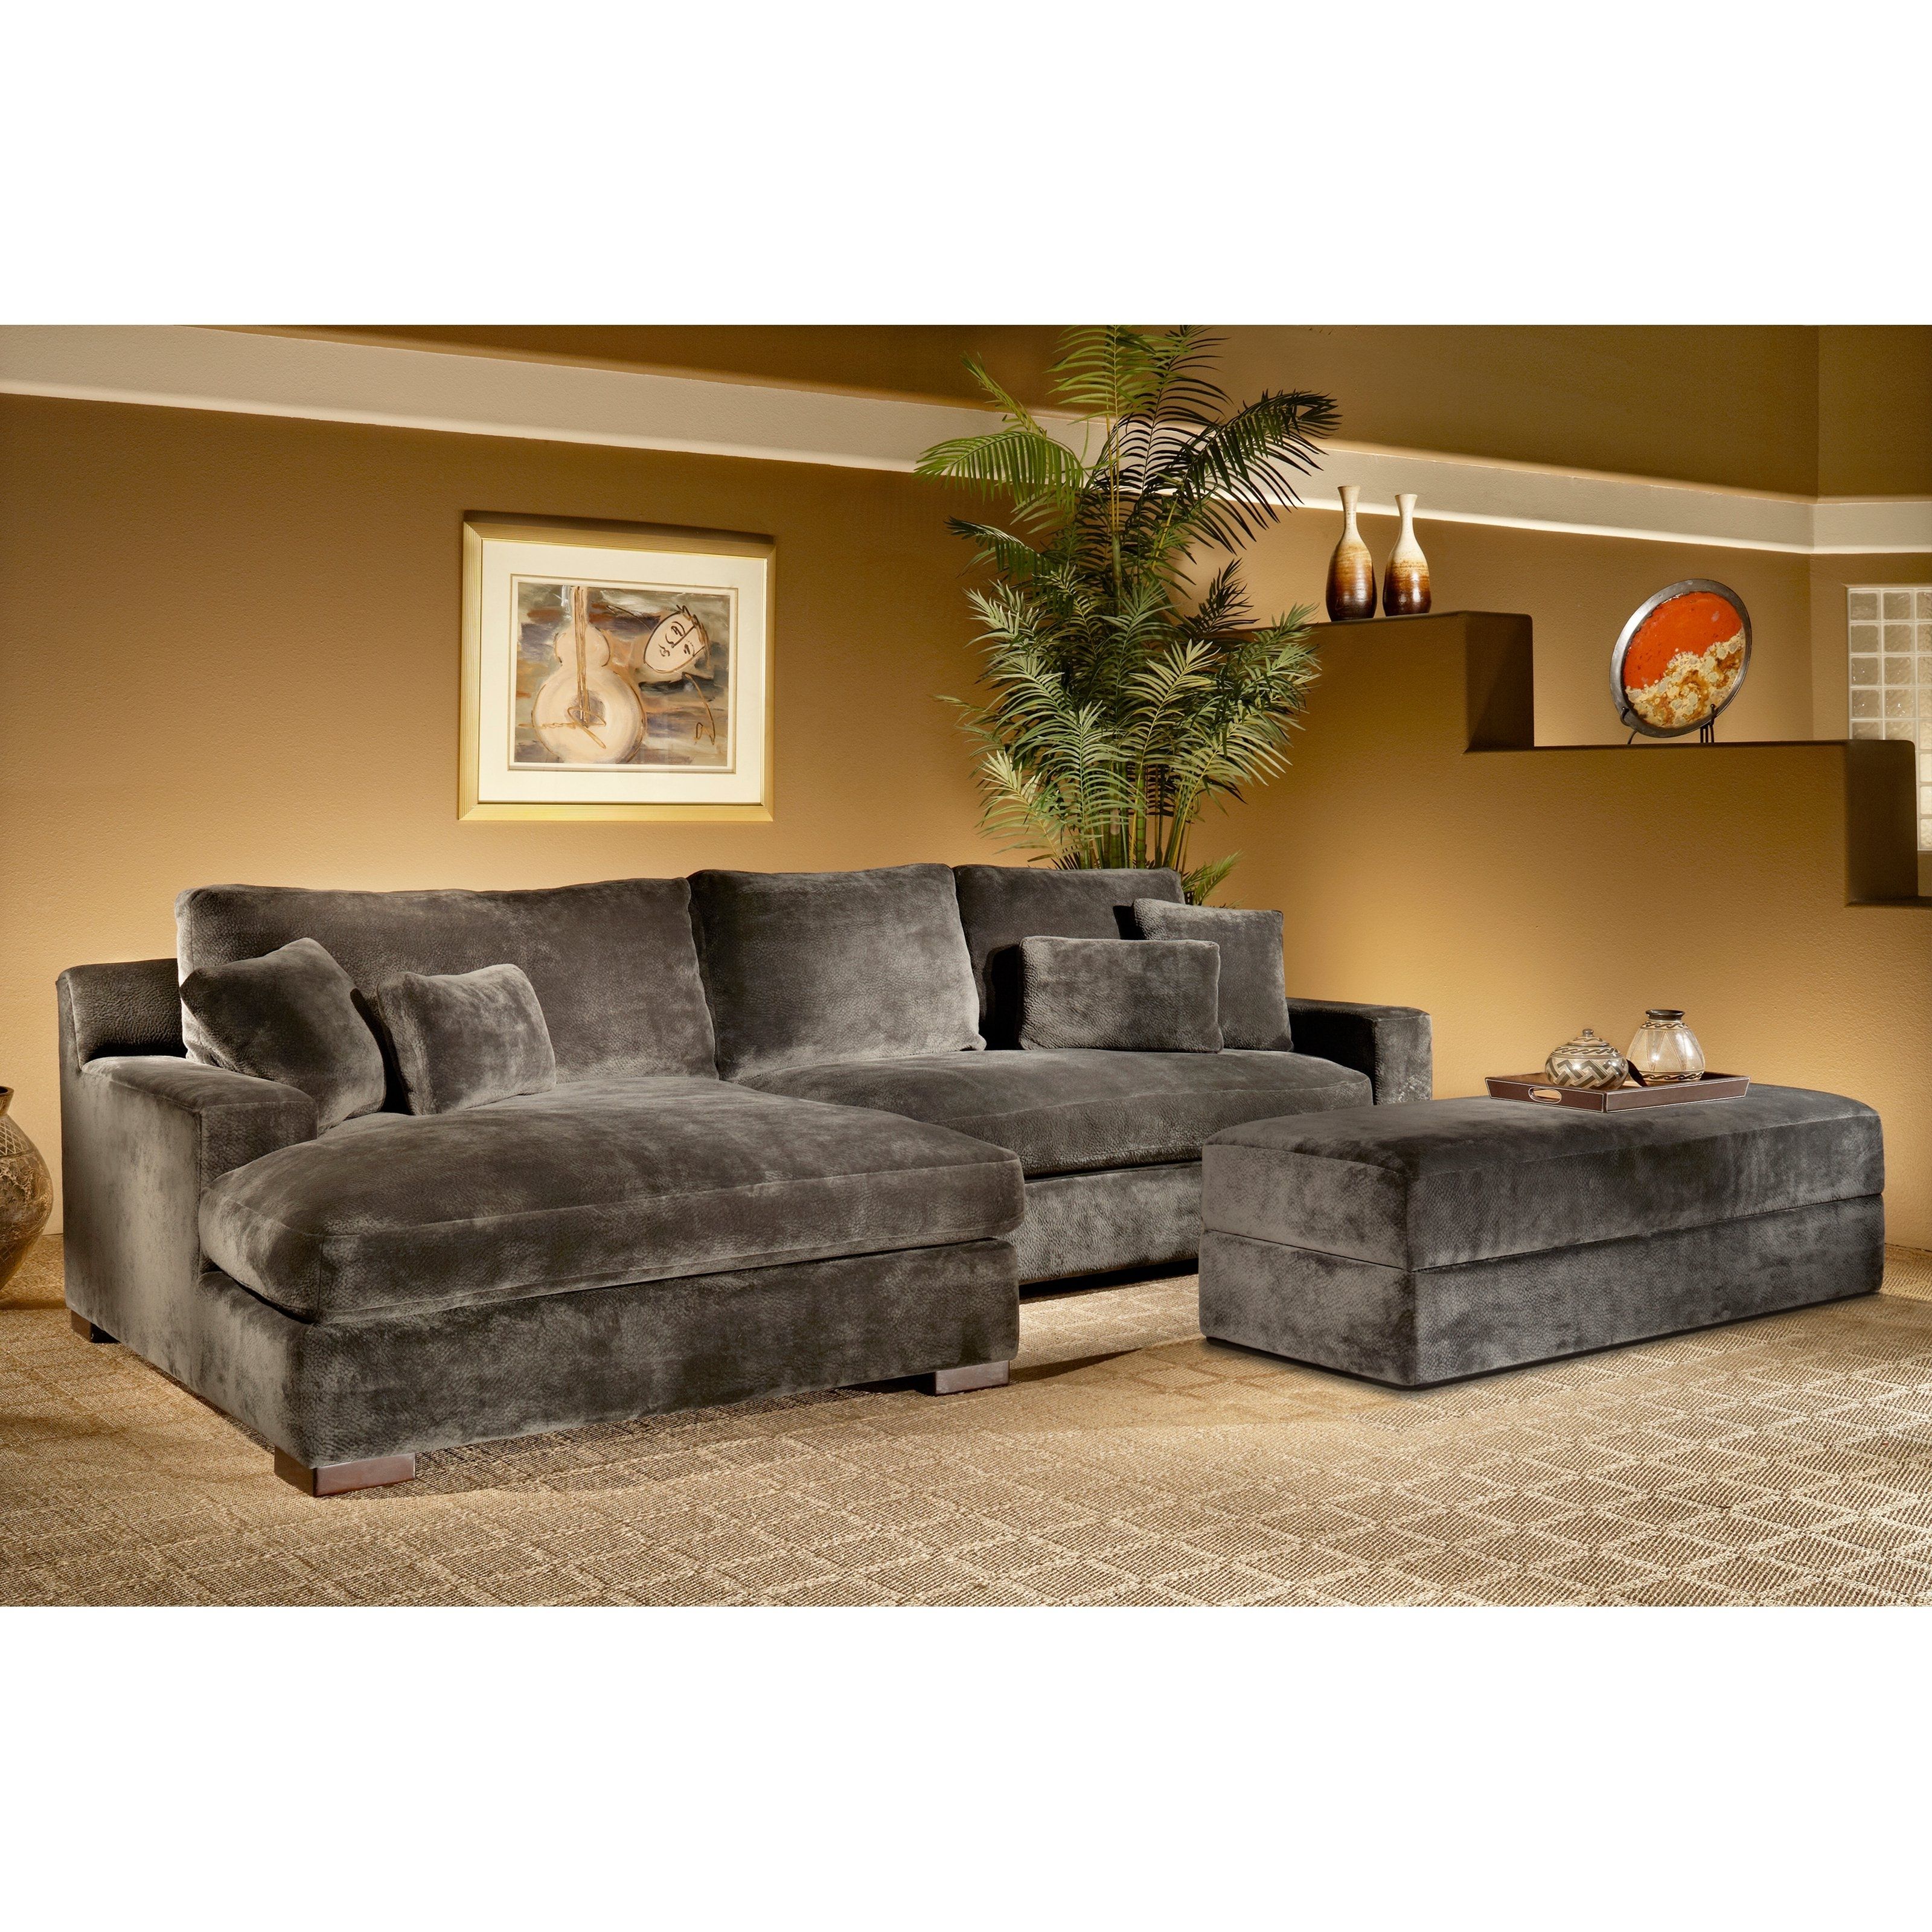 Smoke Colored Leather Sectional | Www (View 29 of 30)